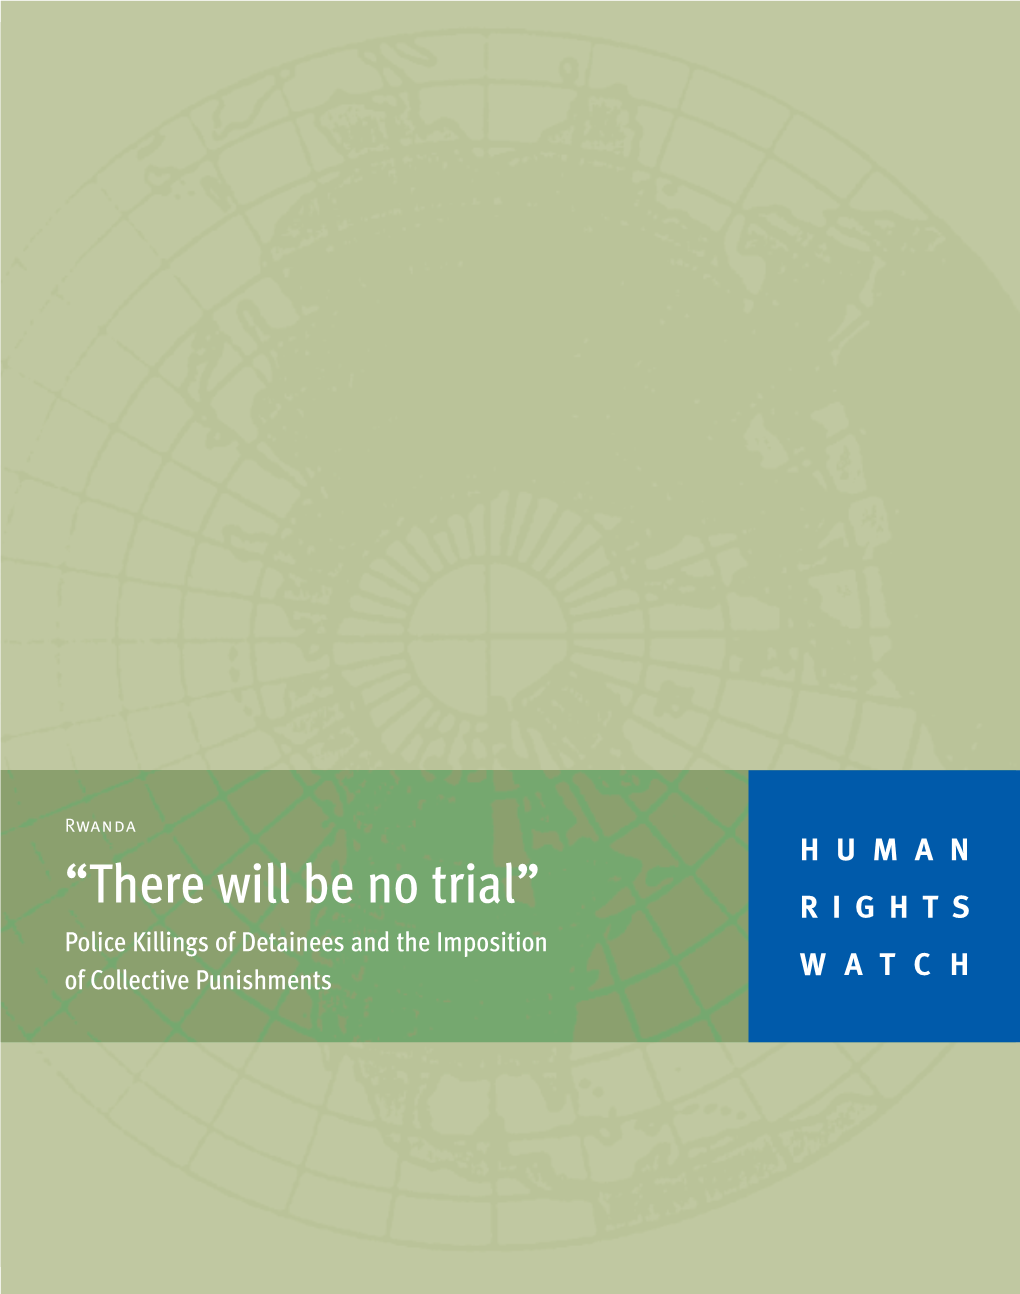 “There Will Be No Trial” RIGHTS Police Killings of Detainees and the Imposition of Collective Punishments WATCH July 2007 Volume 19, No